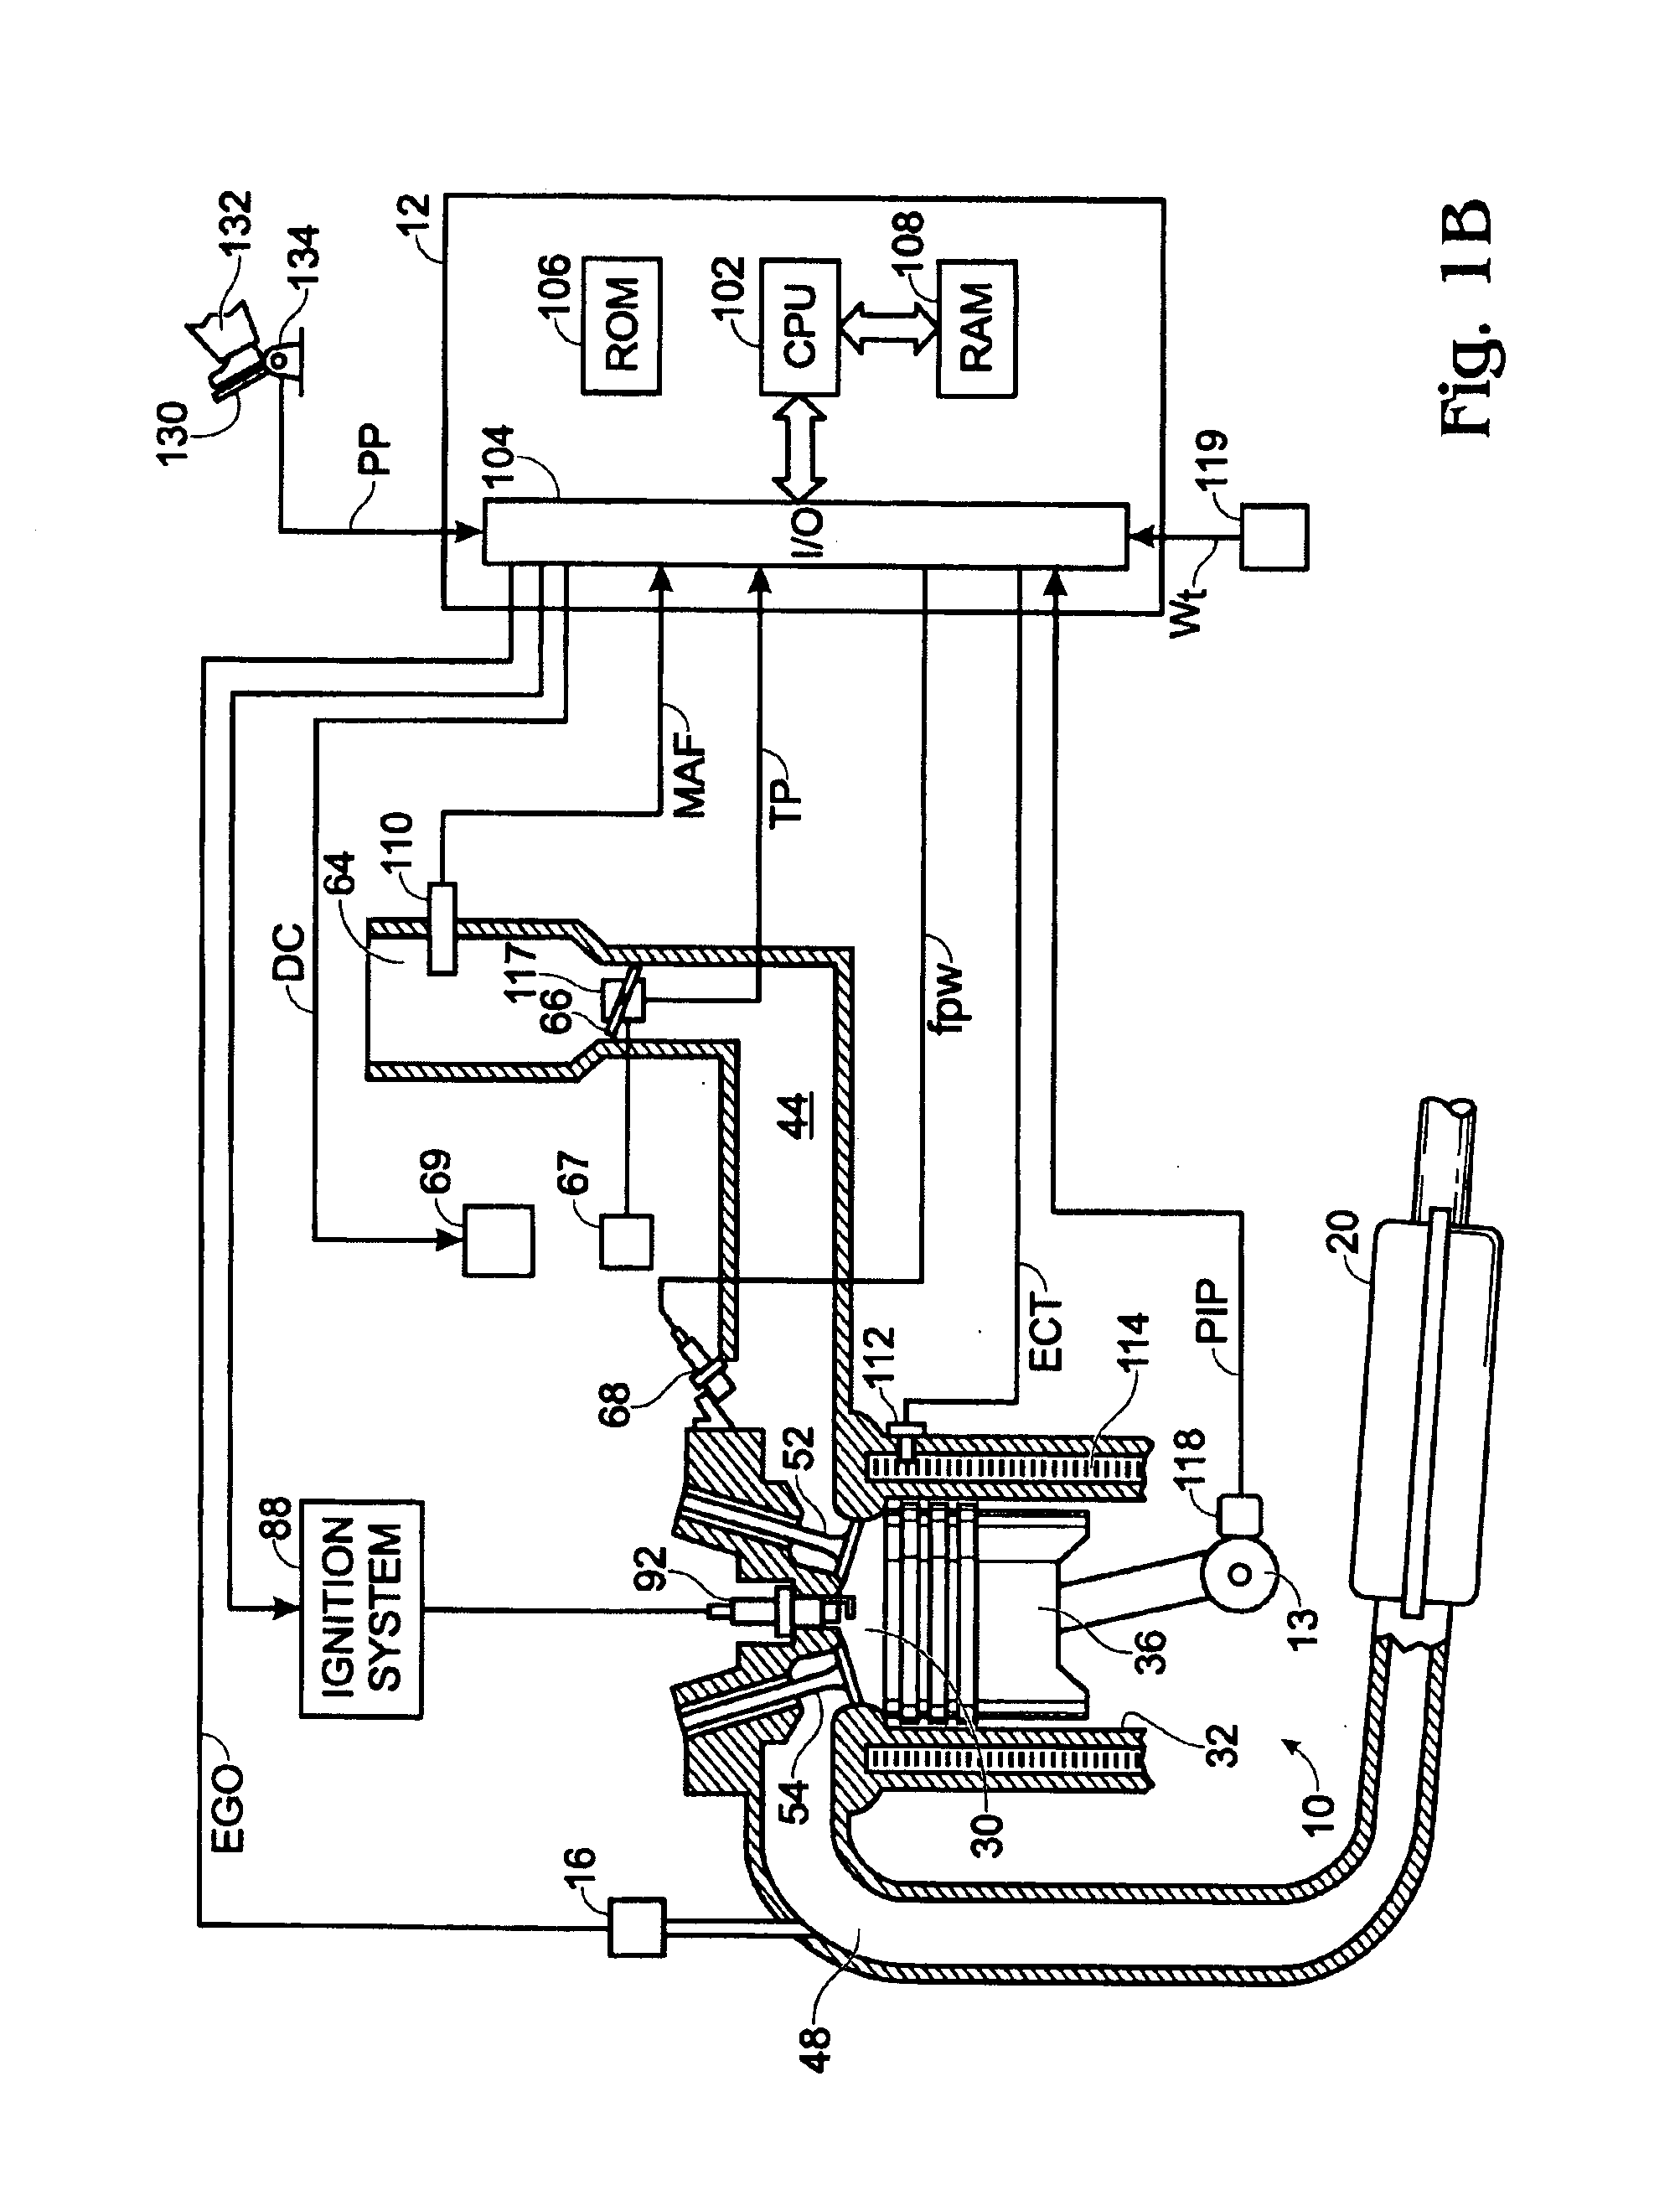 Computer readable storage medium and code for adaptively learning information in a digital control system